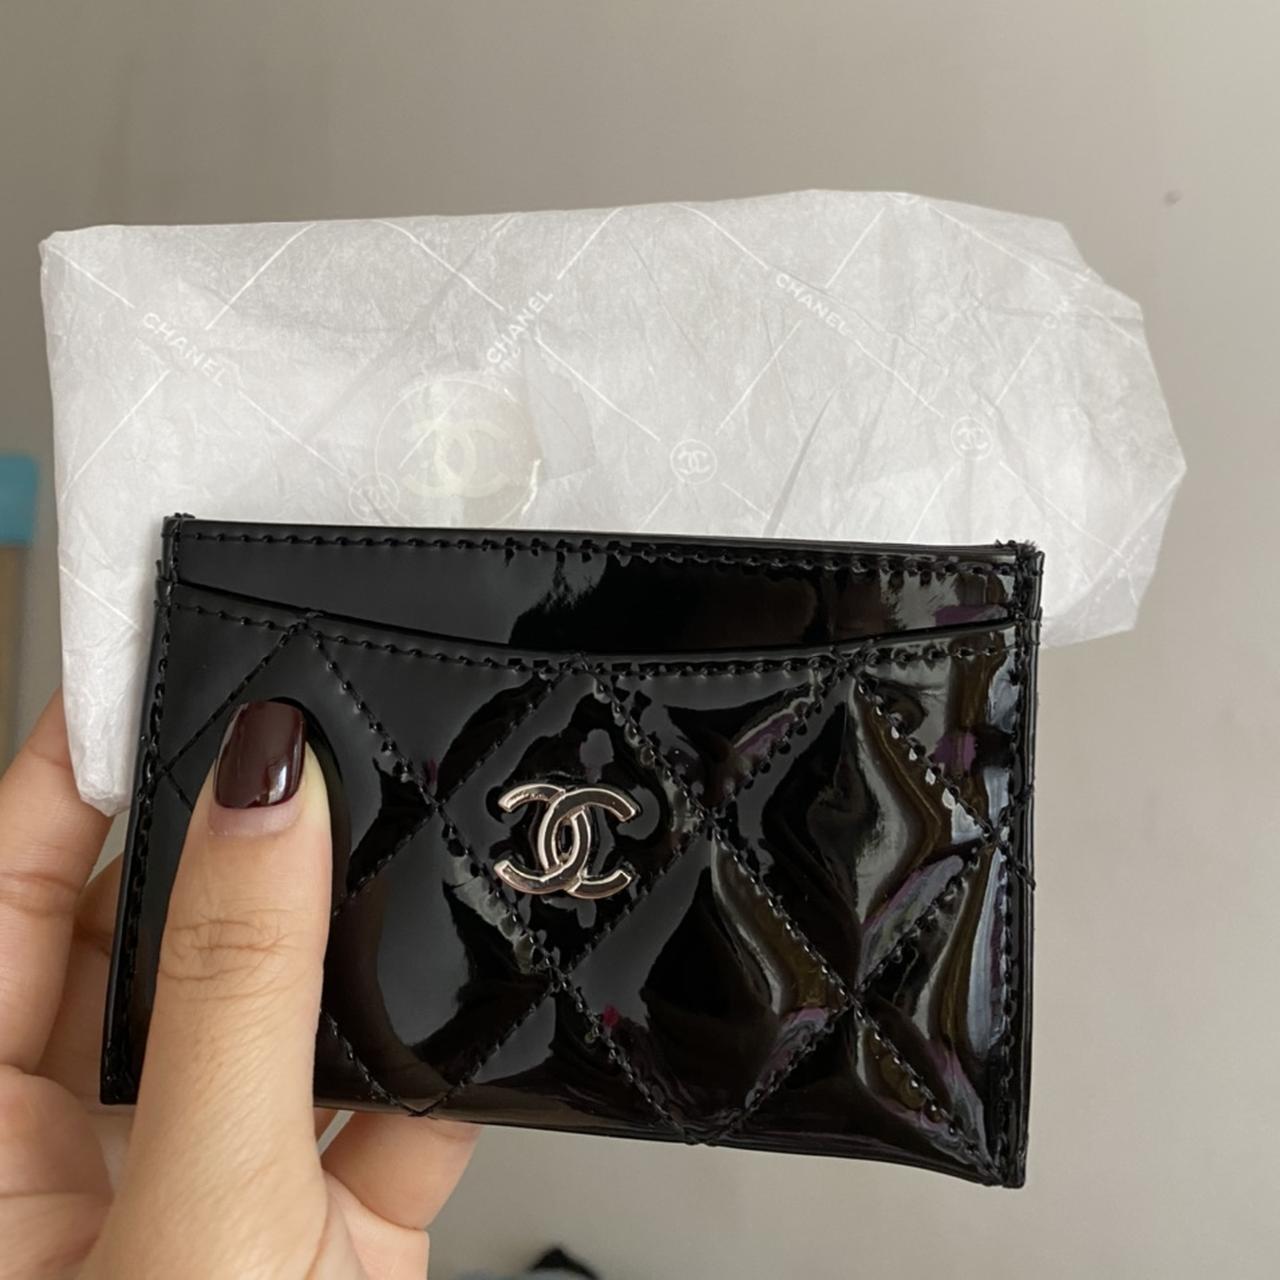 Chanel cardholder patent leather Its a vip gift - Depop